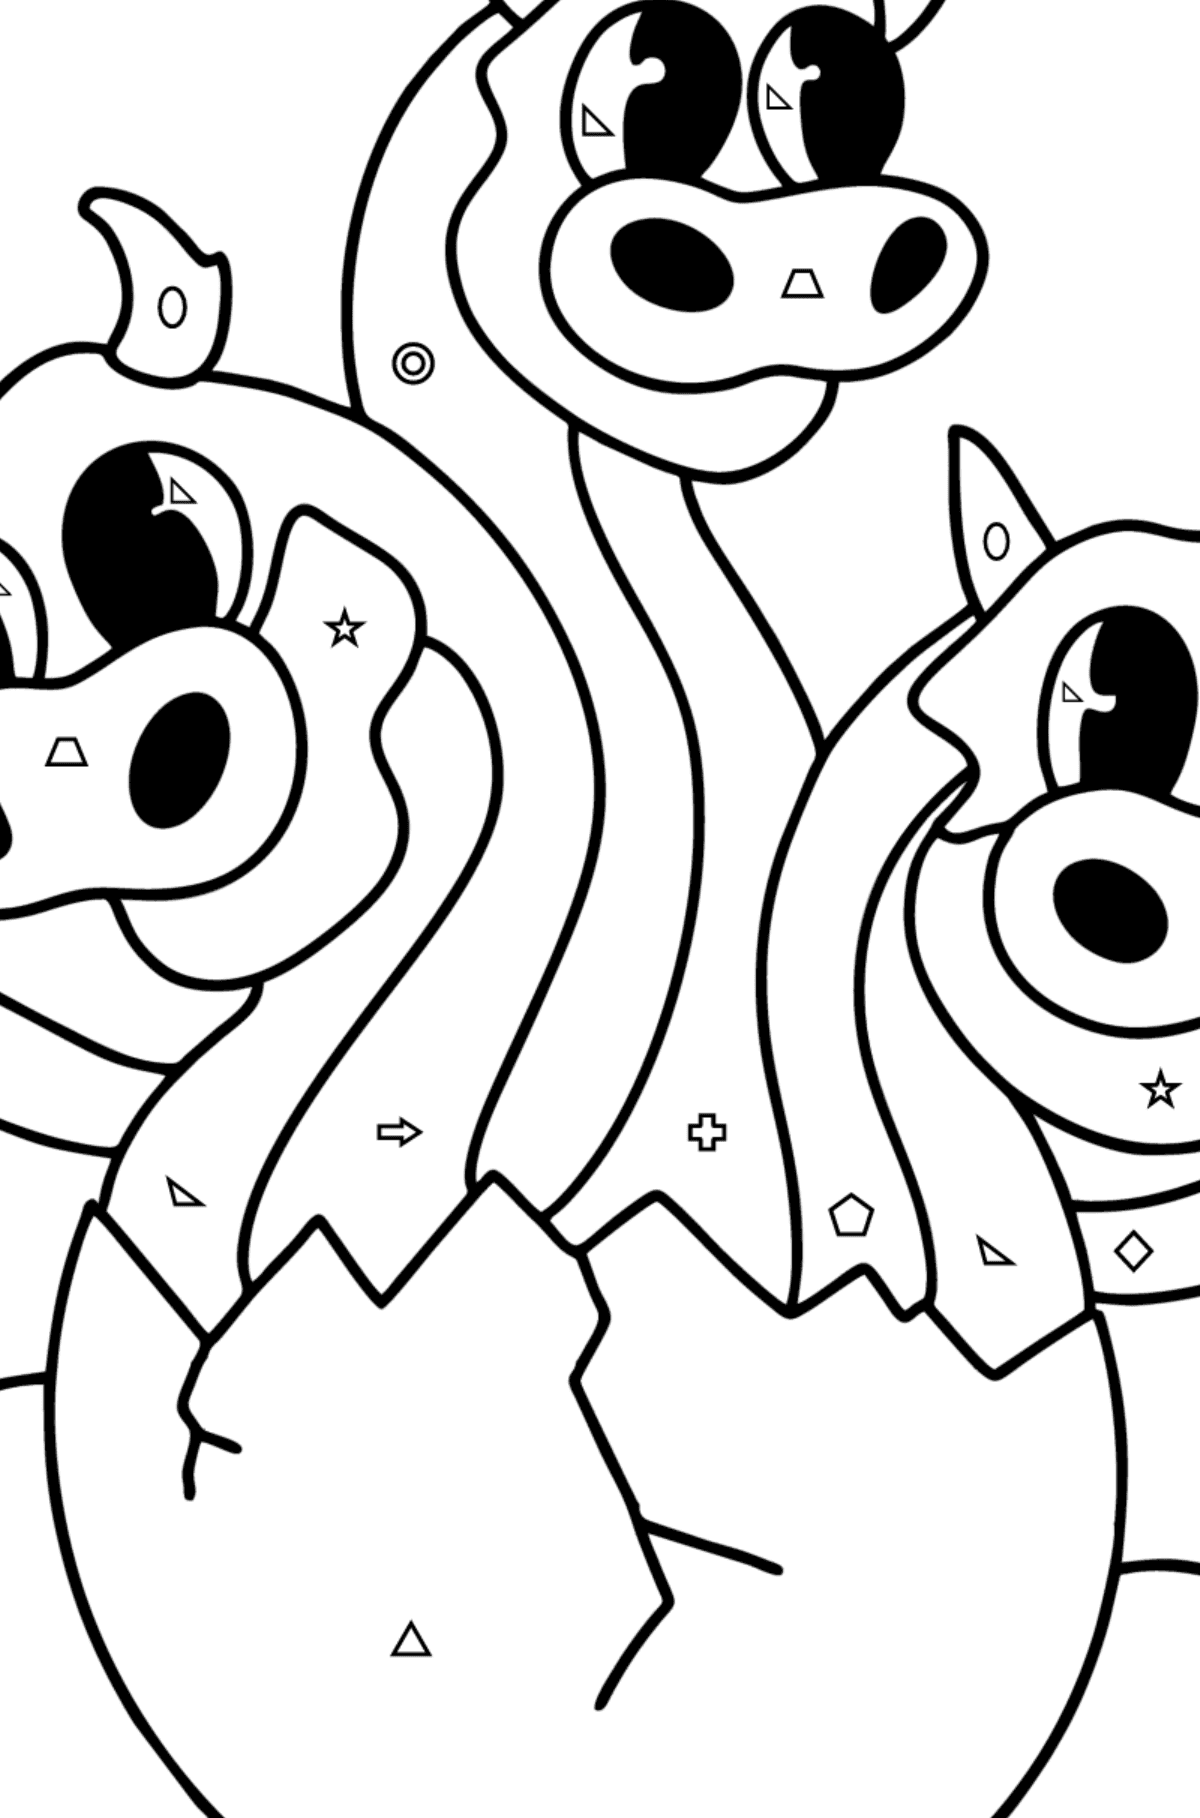 Dragon with three heads coloring page - Coloring by Geometric Shapes for Kids